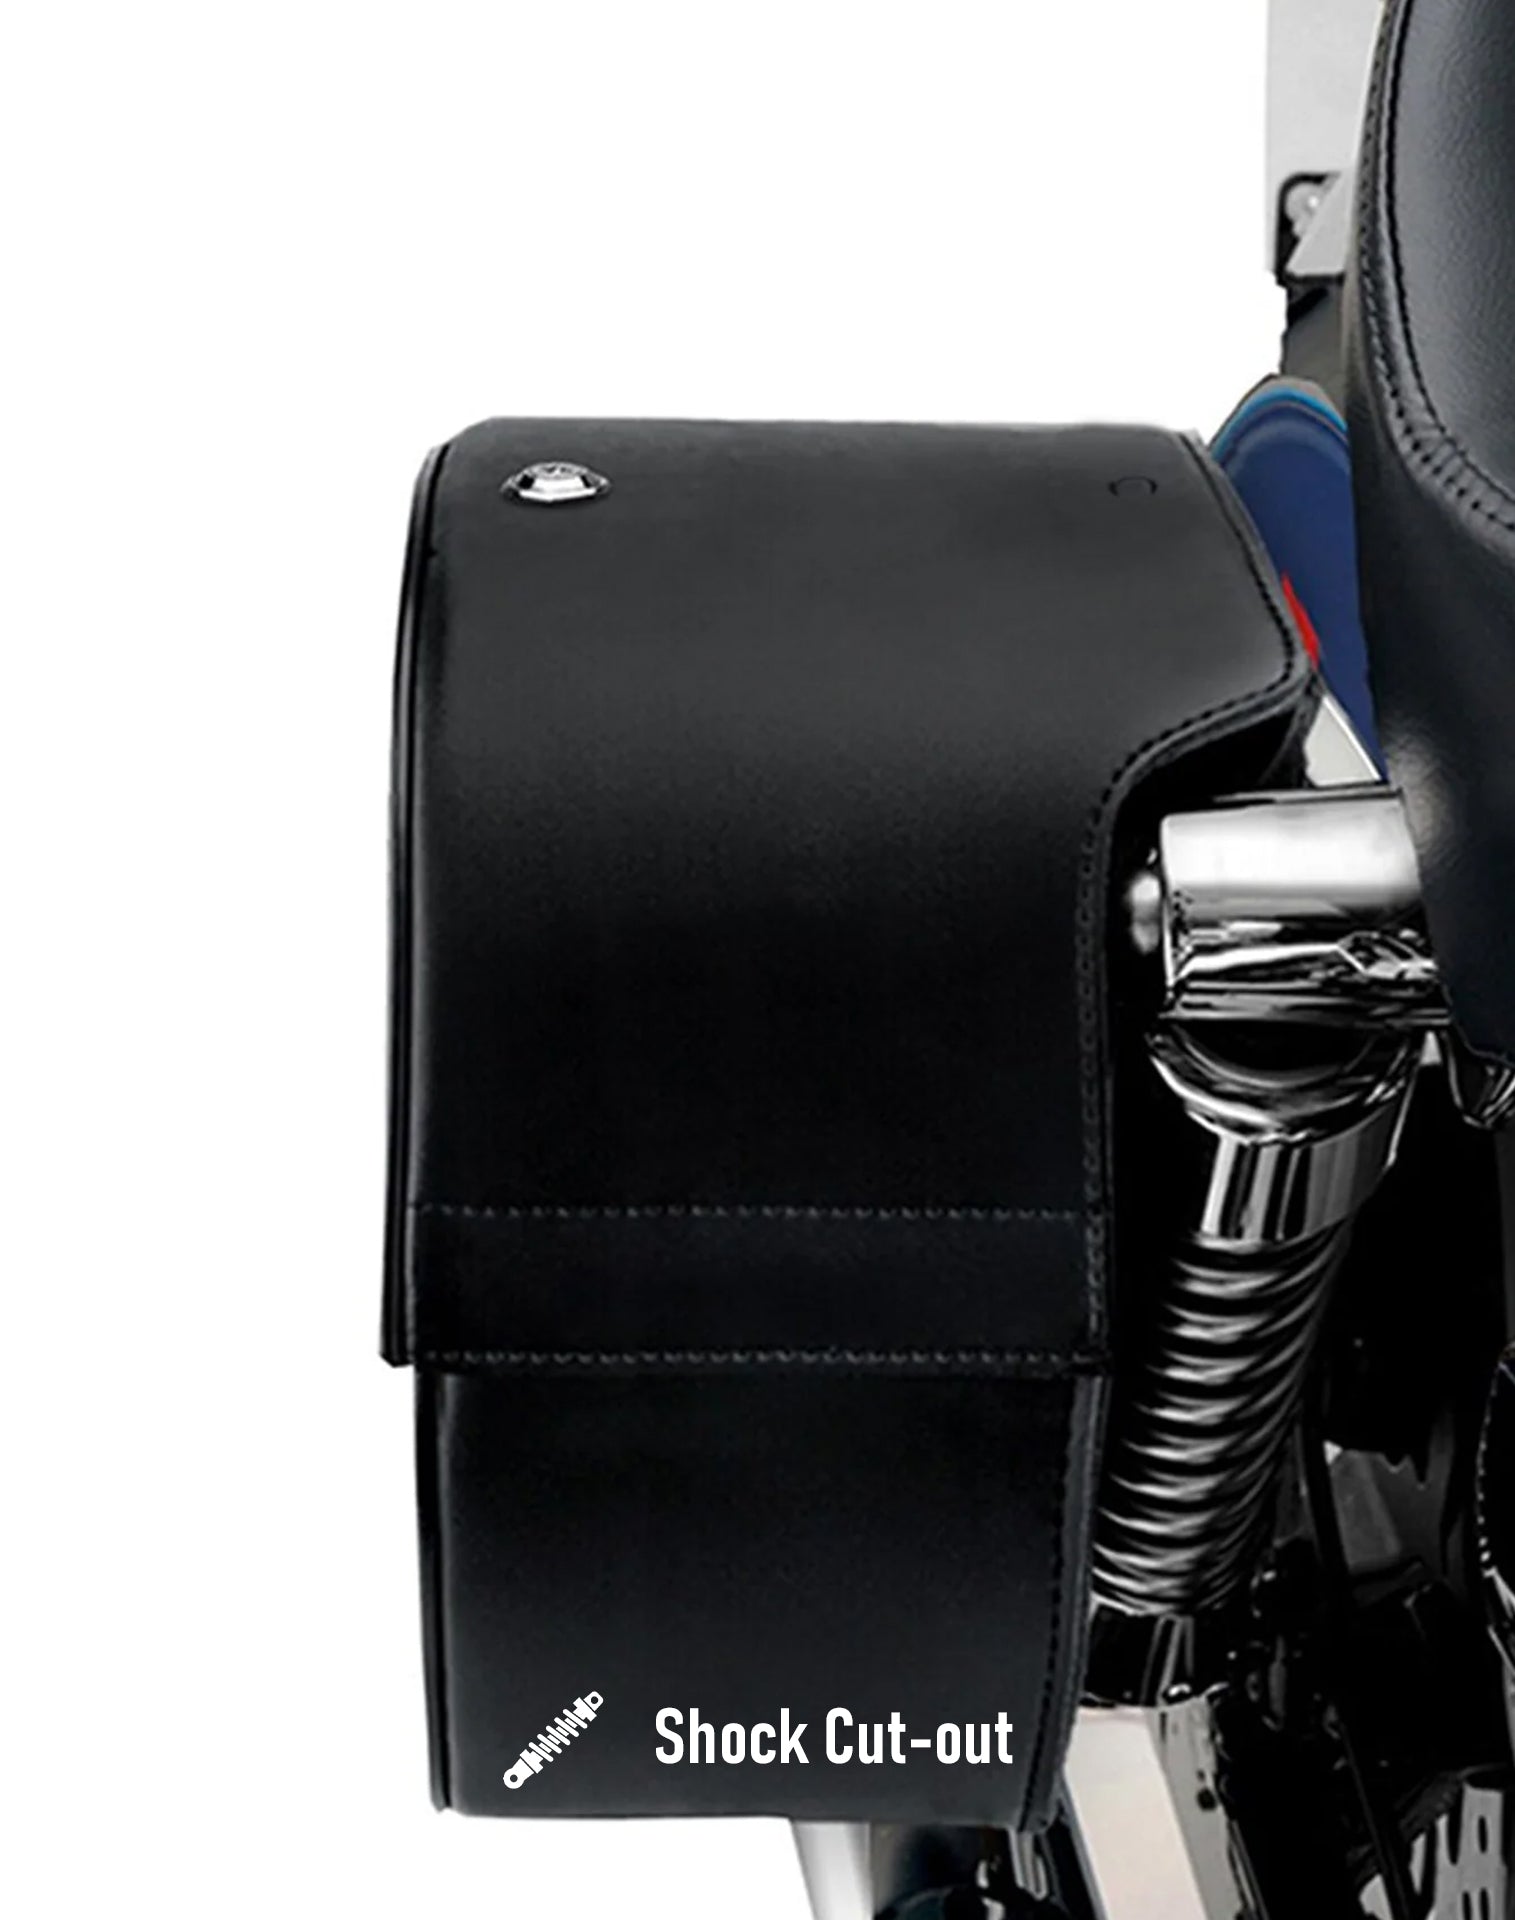 Viking Essential Side Pocket Large Shock Cutout Leather Motorcycle Saddlebags For Harley Sportster 883 Custom Xl883C Xlh883C Hard Shell Construction